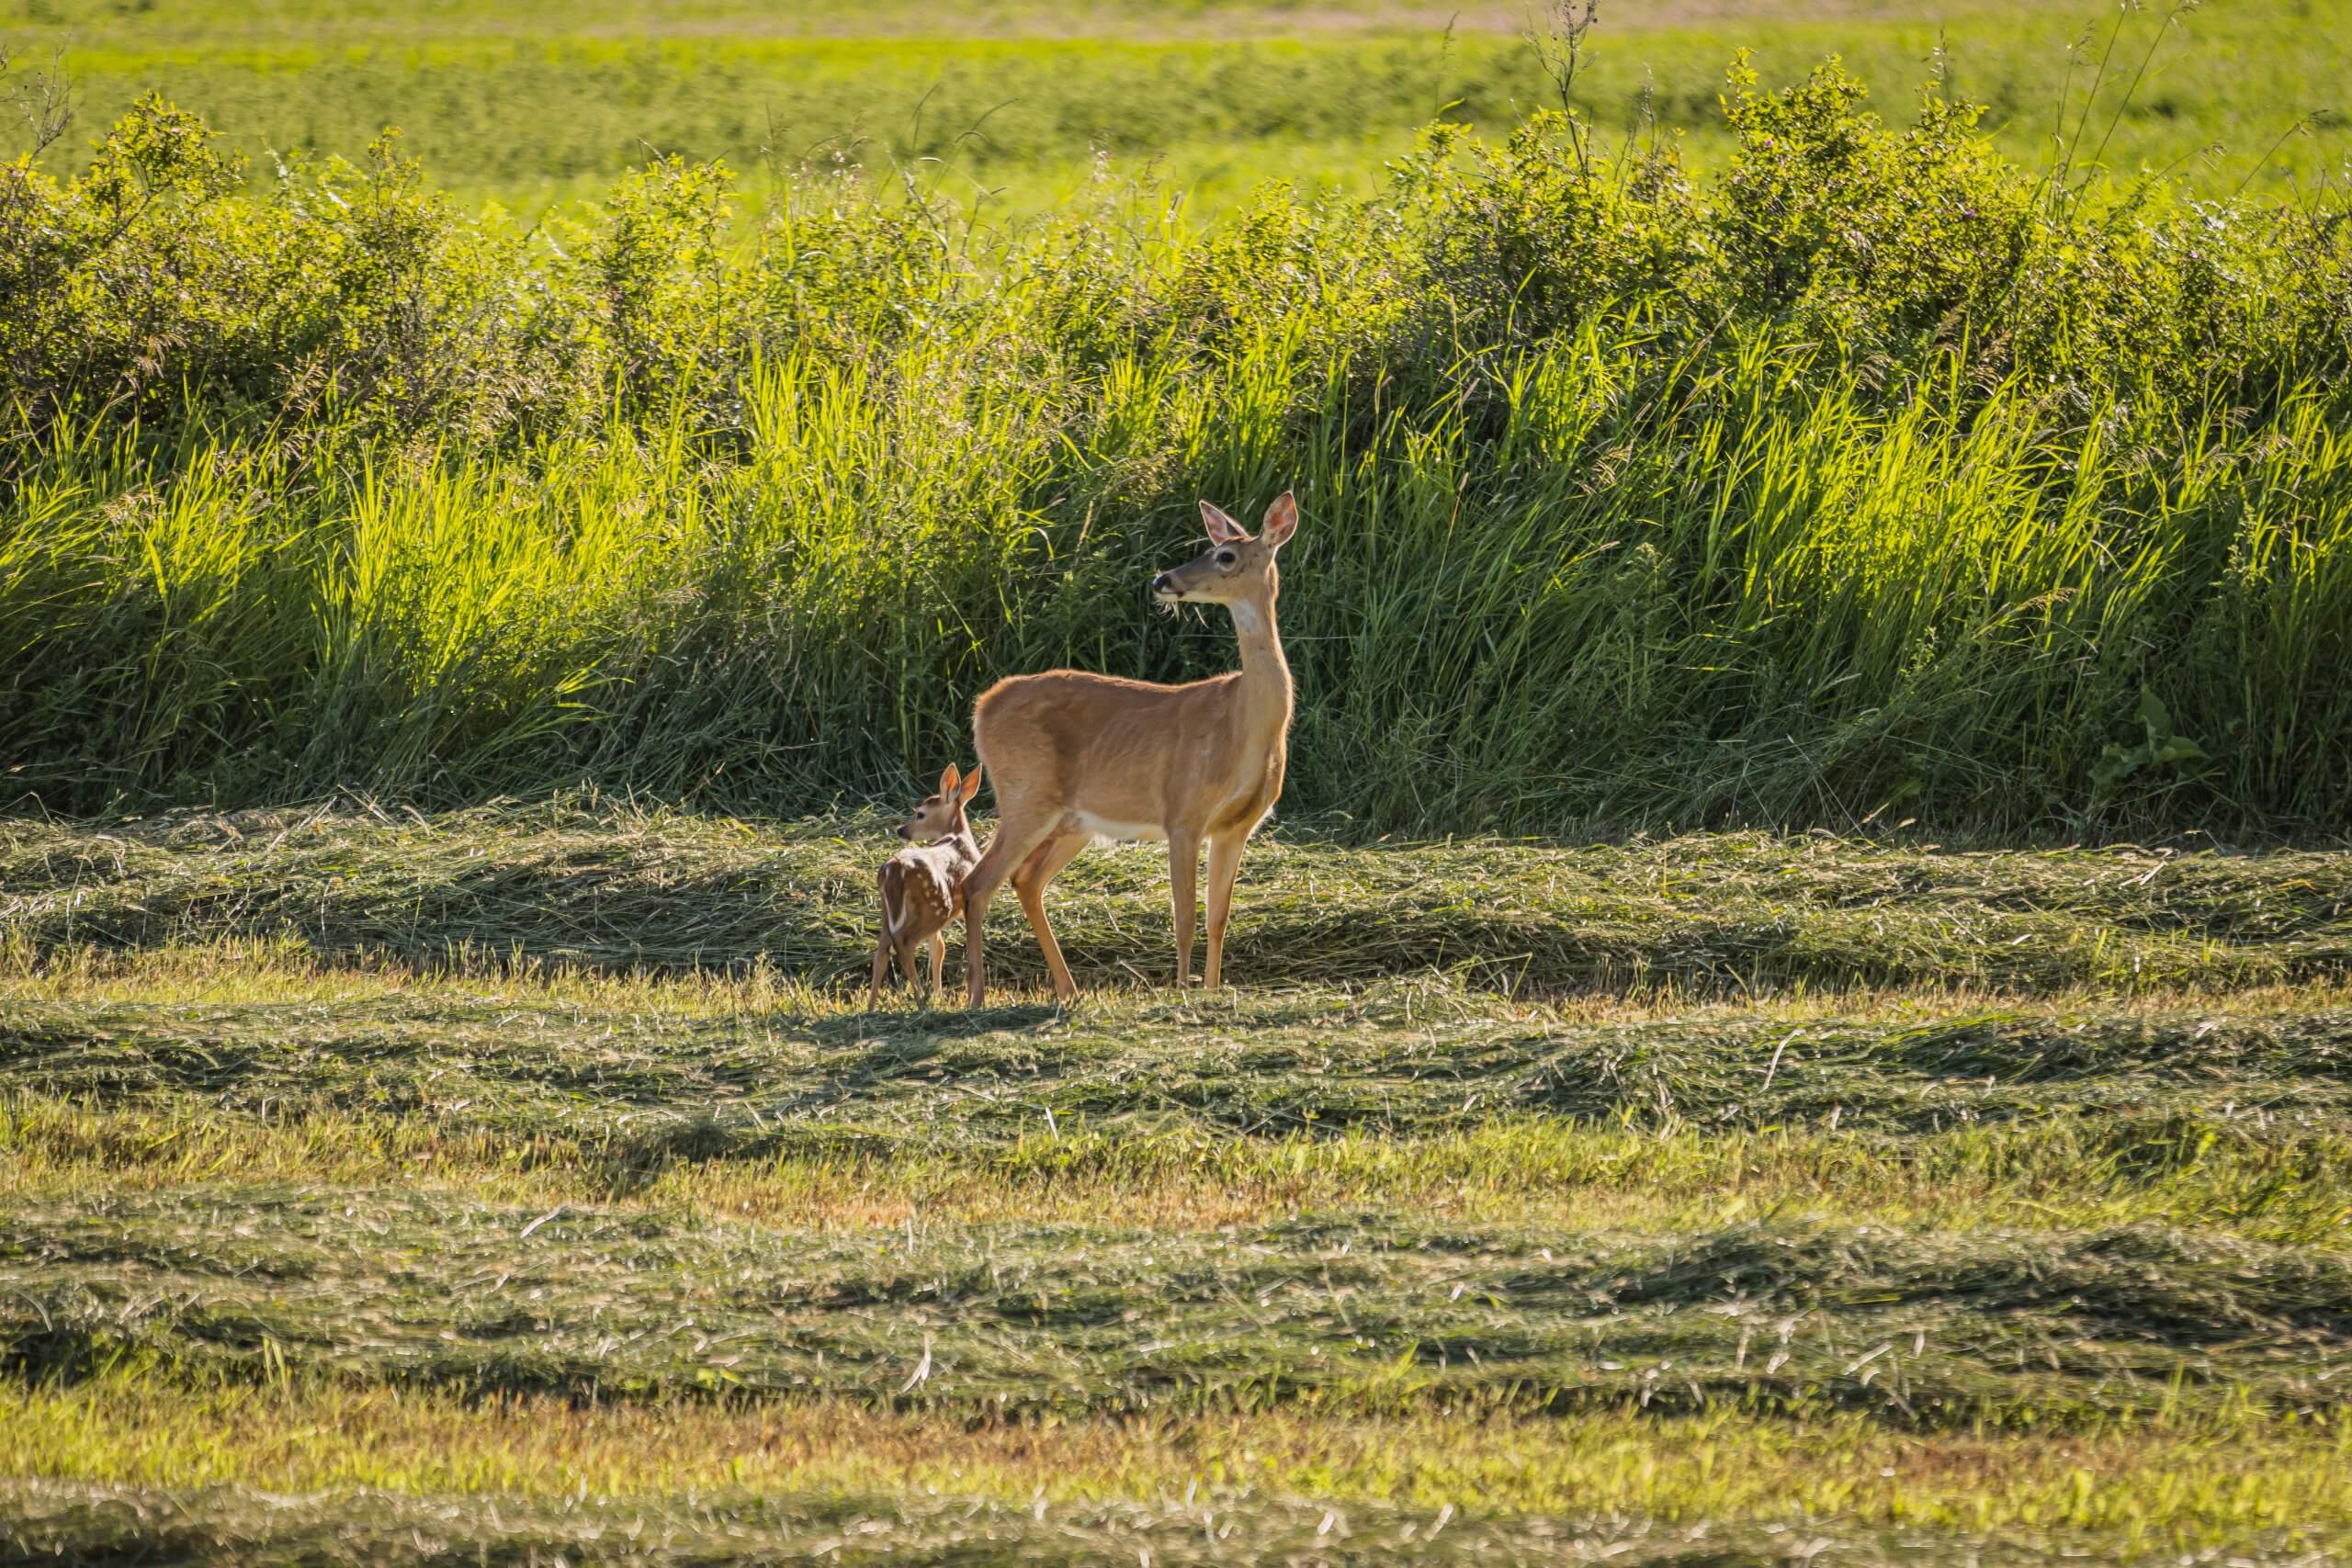 A doe and her fawn stand in a field nearby the Wild Horse Trail Scenic Byway.